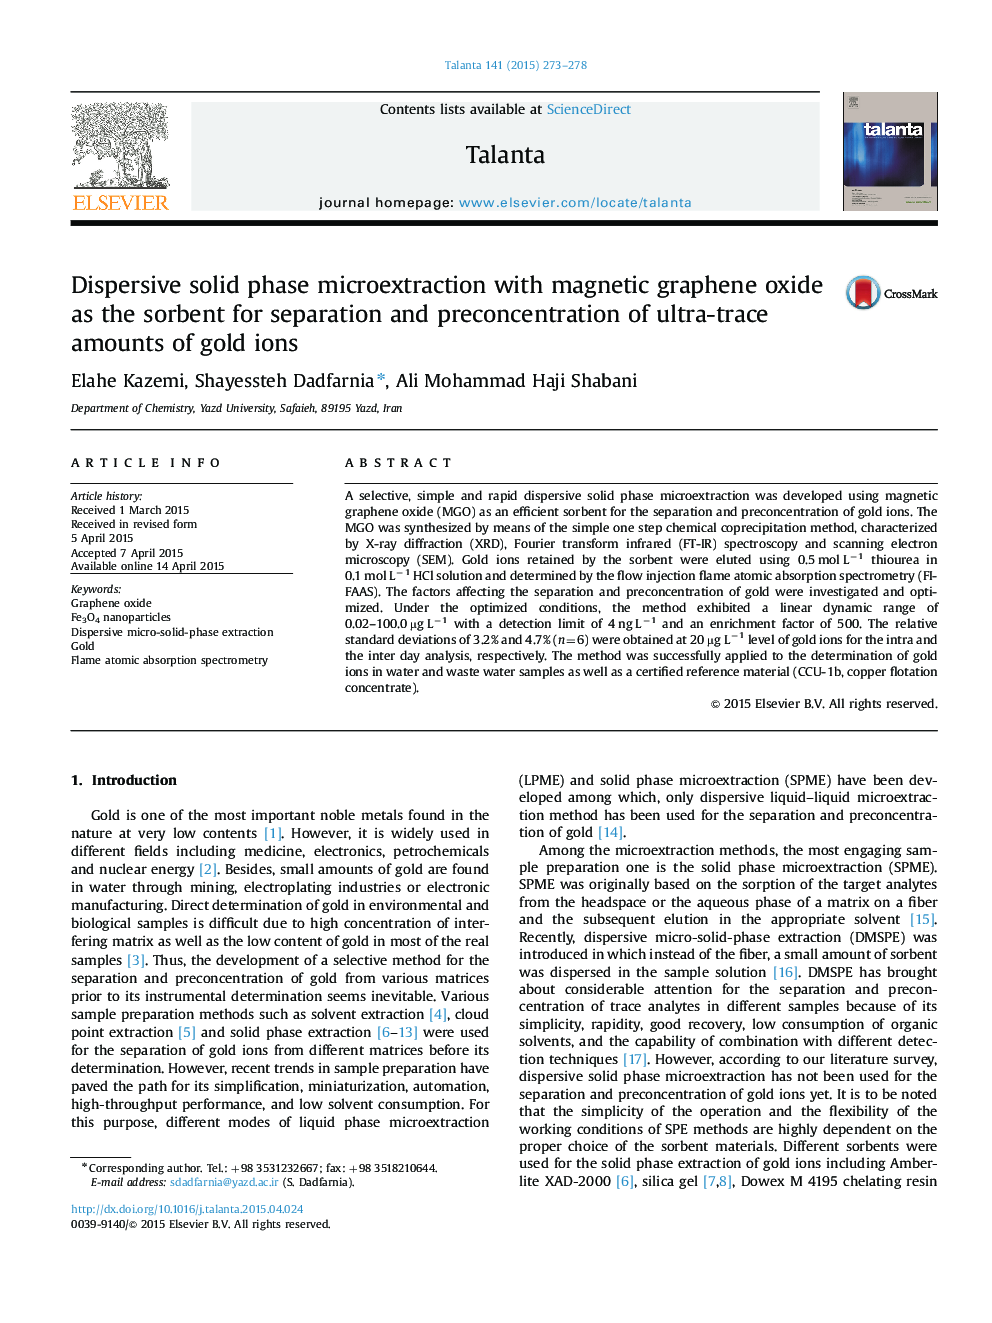 Dispersive solid phase microextraction with magnetic graphene oxide as the sorbent for separation and preconcentration of ultra-trace amounts of gold ions